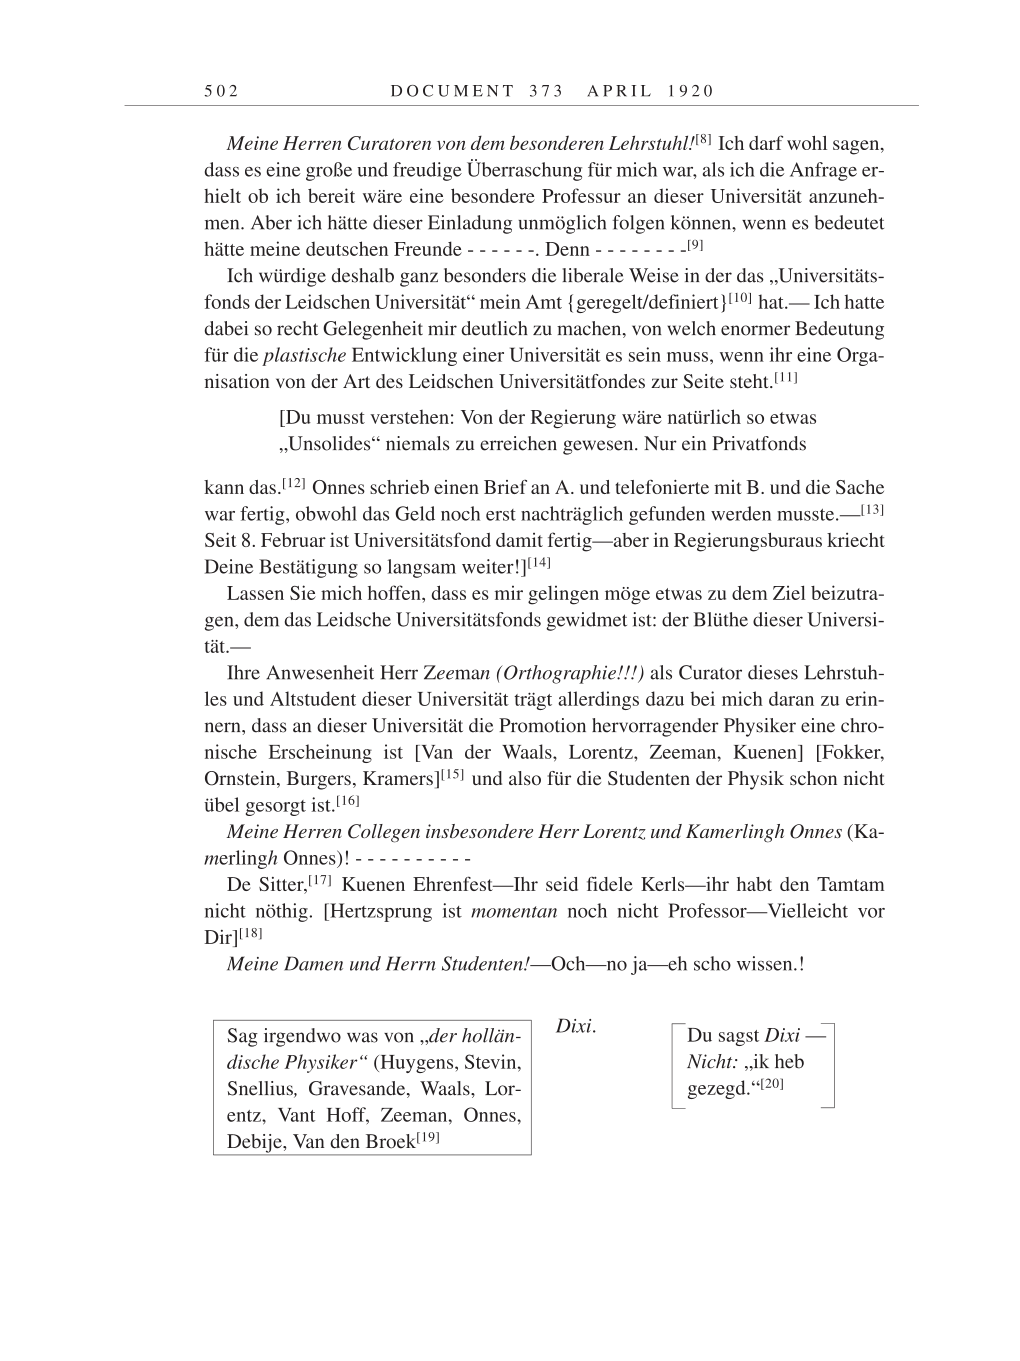 Volume 9: The Berlin Years: Correspondence January 1919-April 1920 page 502